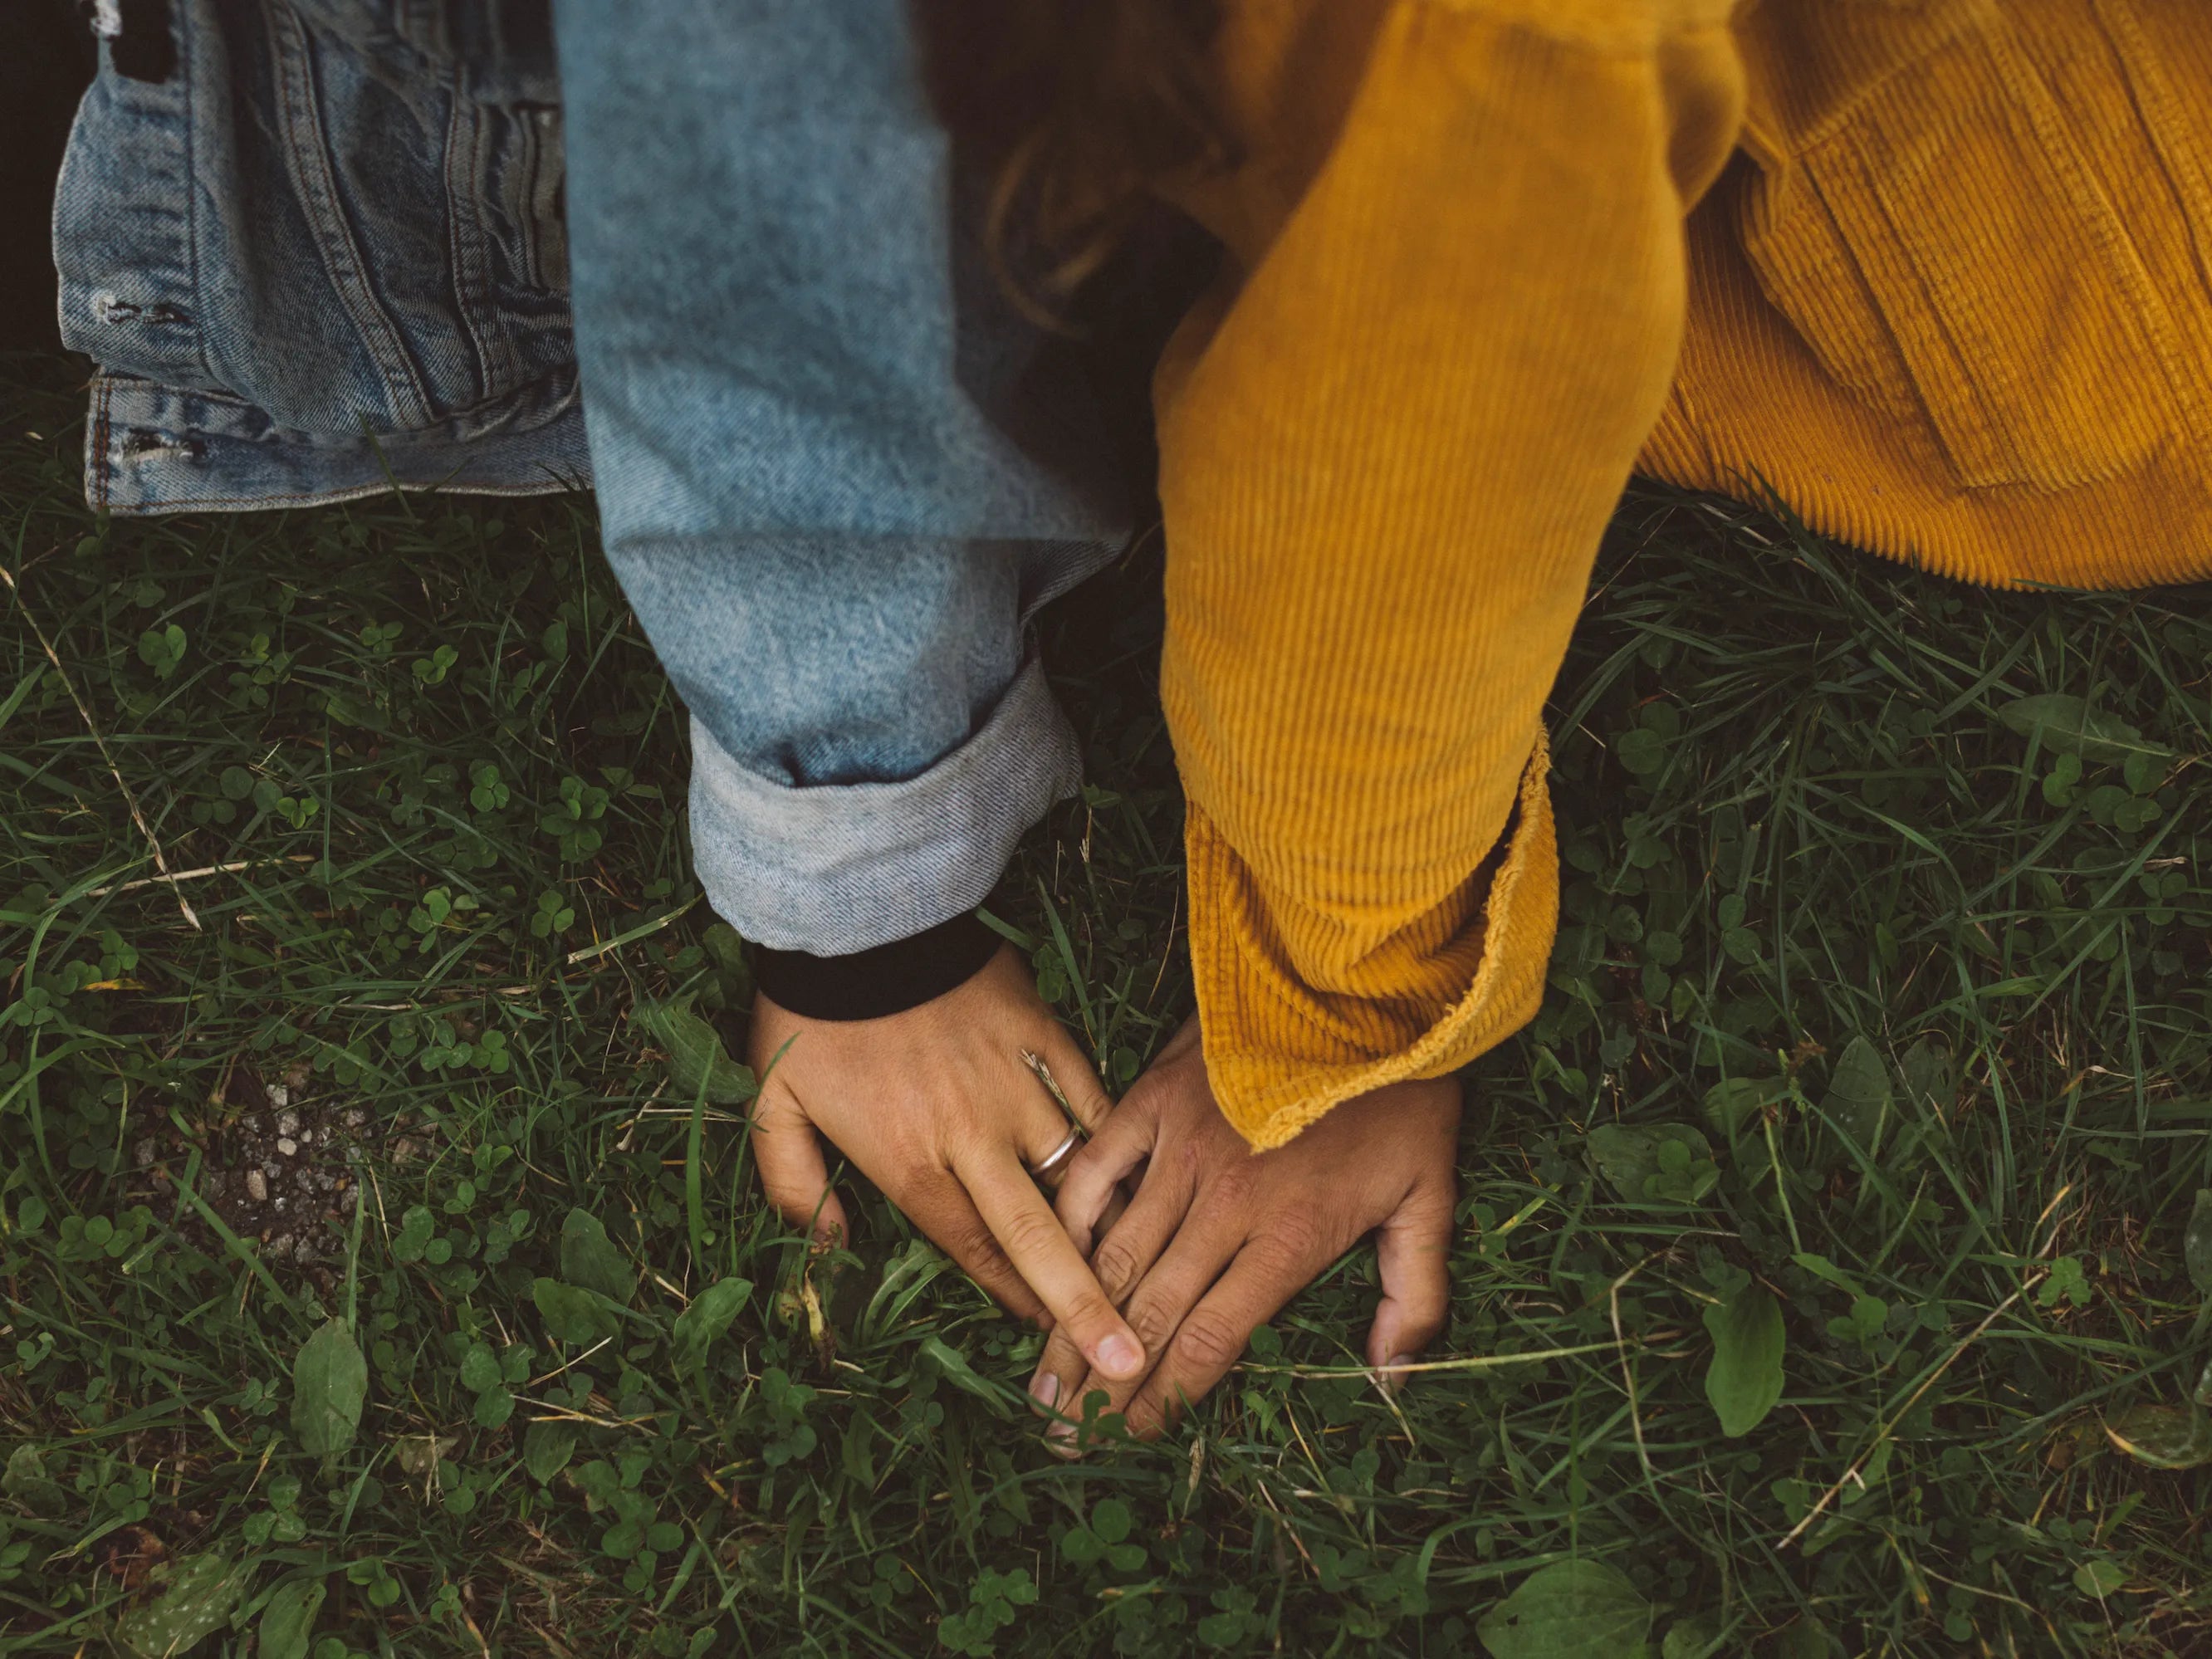 How to Use the Twin Flame Spell to Determine if Someone is Your True Twin Flame